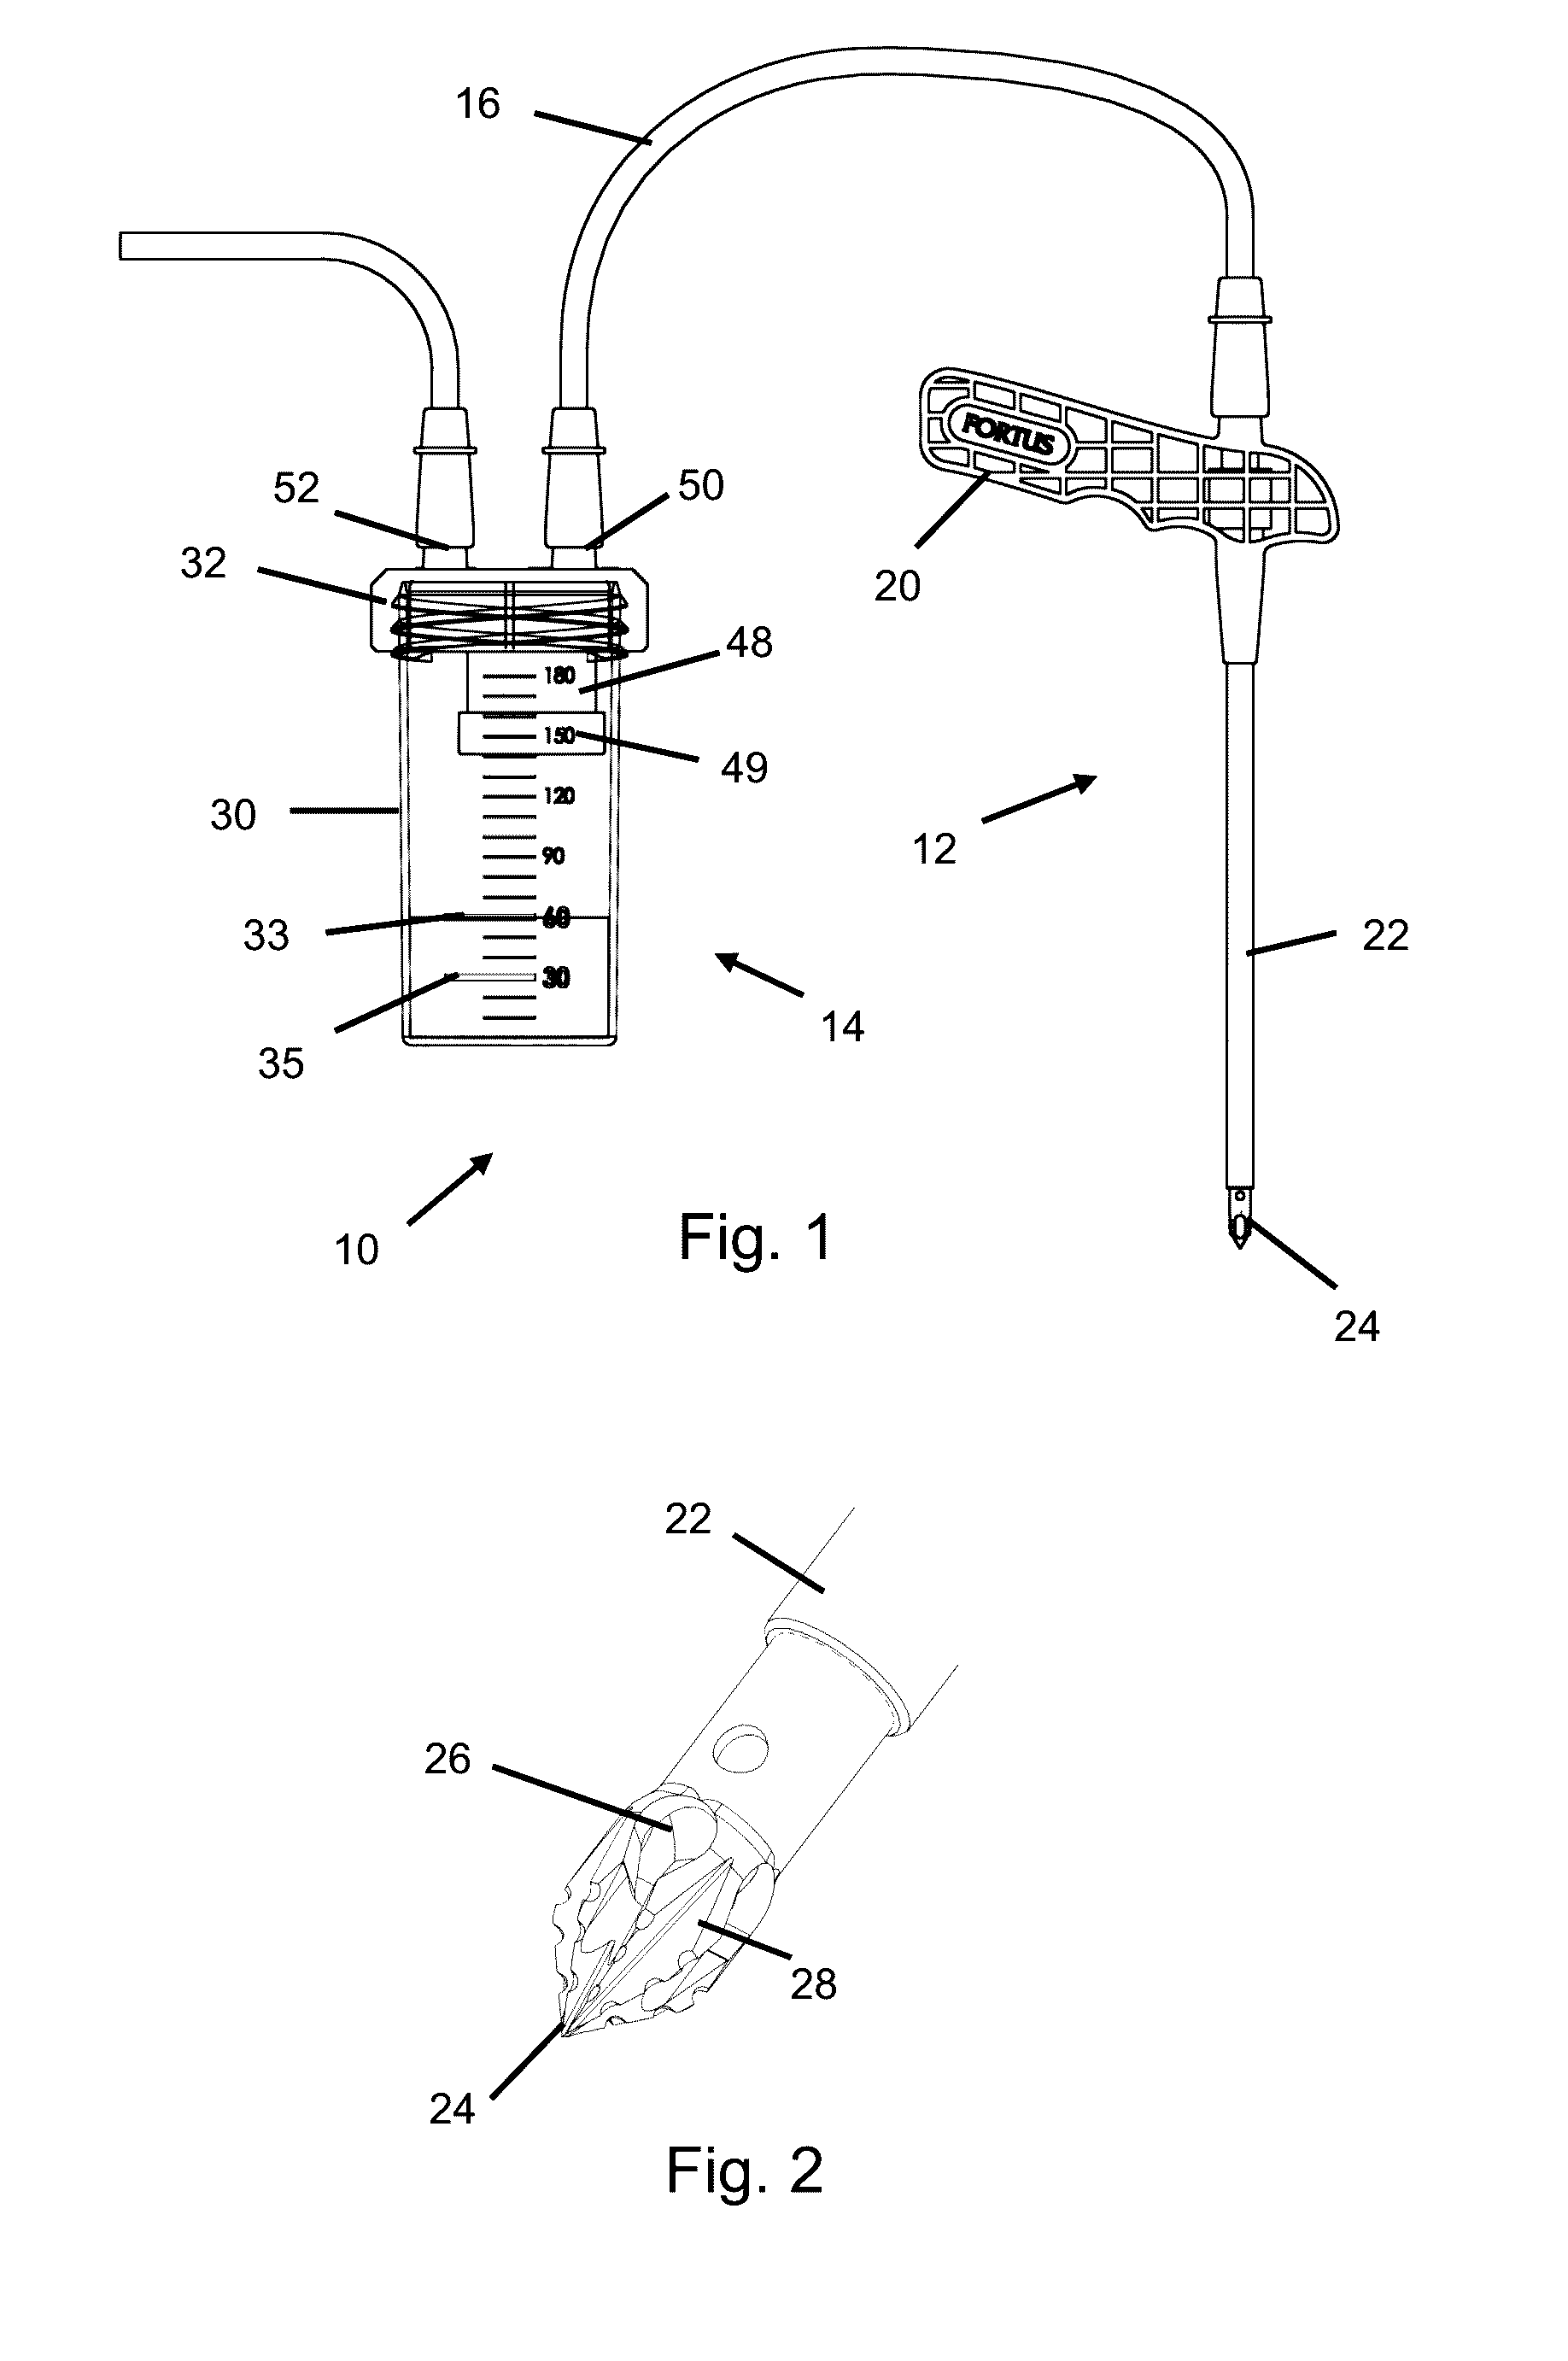 Bone fragment and tissue processing system